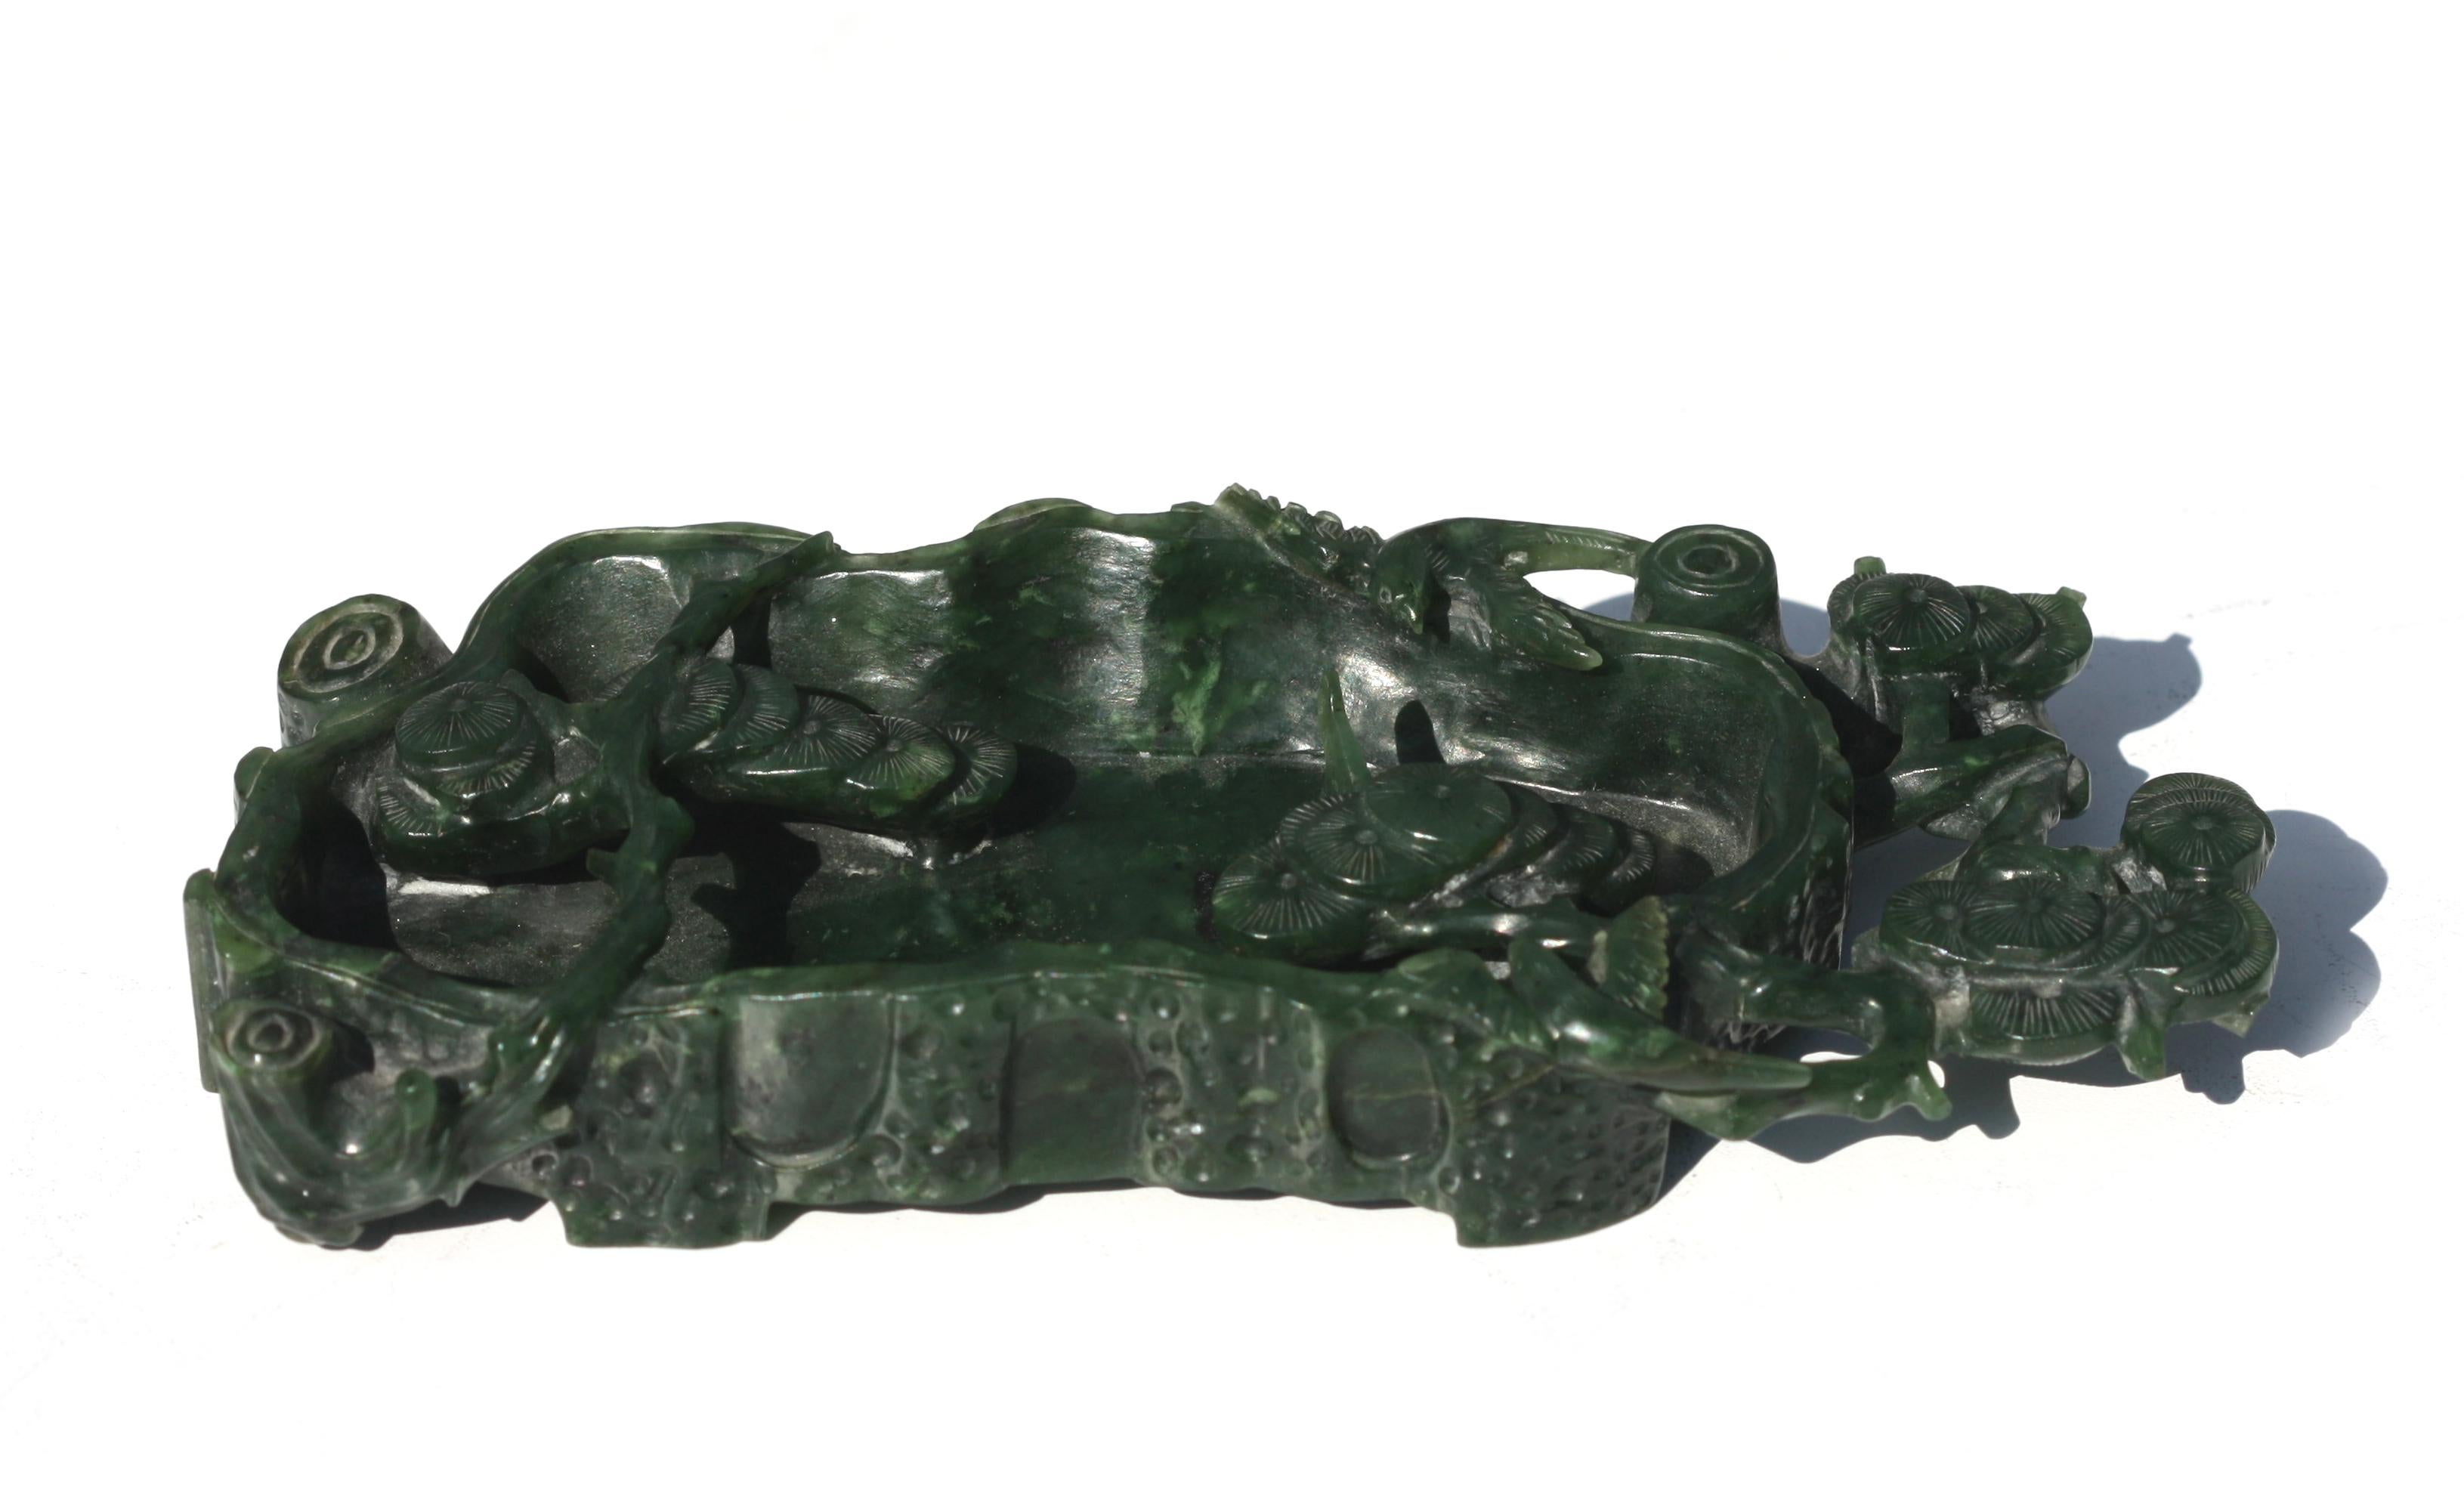 Chinese Spinach Jade Brush Washer
Depicting an asymmetrical rectangular rock pond, with blossoming lingzhi branches.
Height 1 in. (2.54 cm.), Width 6.75 in. (17.14 cm.), Depth 3 in. (7.62 cm.)